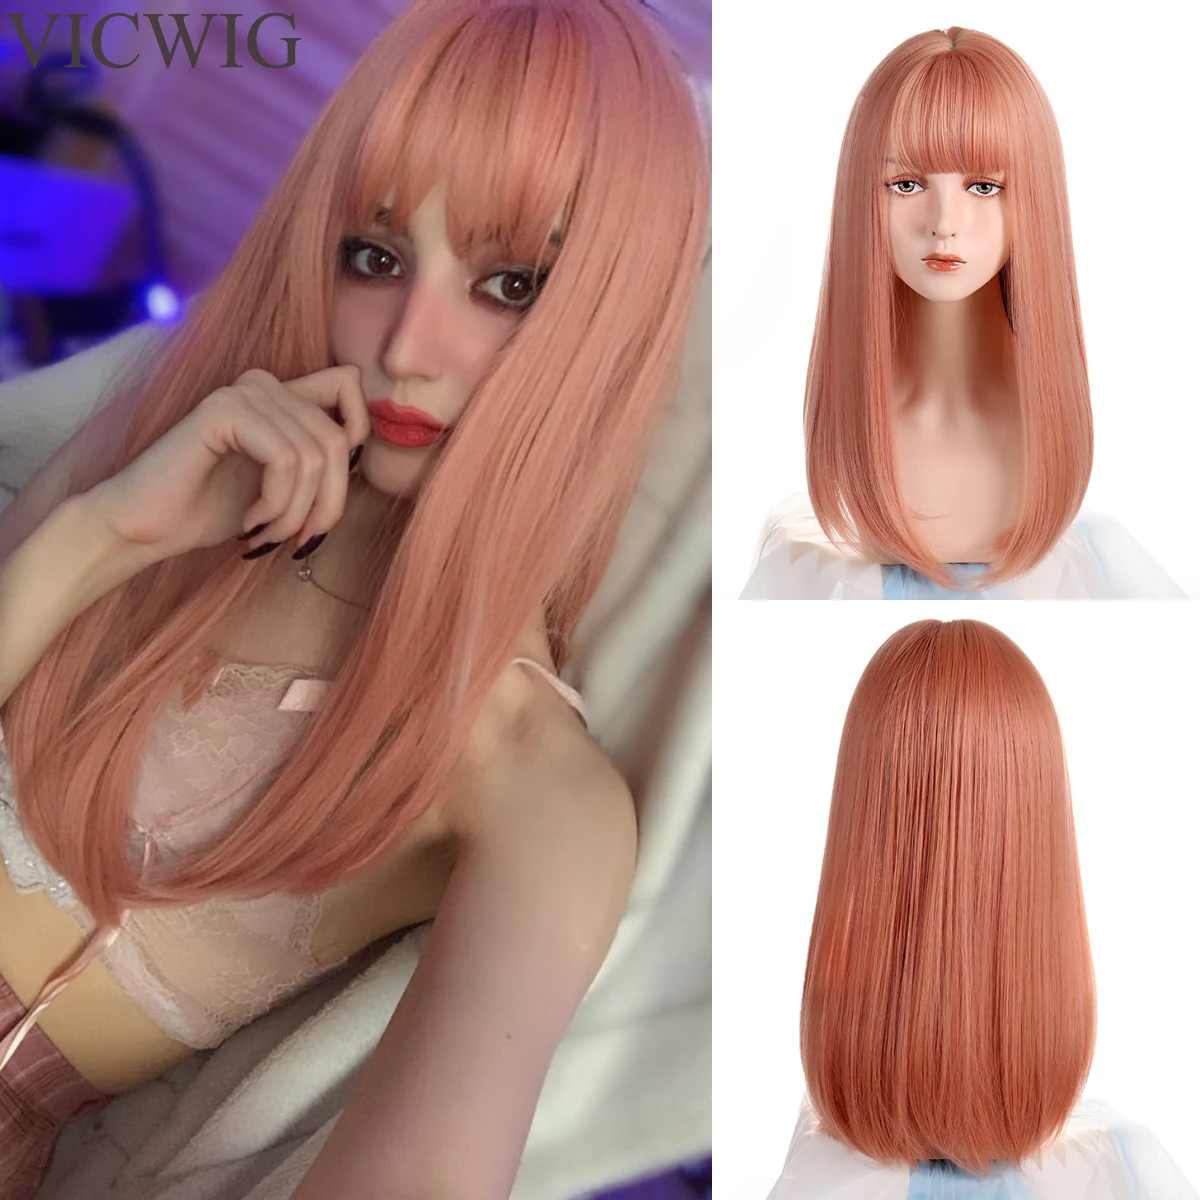 VICWIG Medium Length Cosplay Wig With Bangs Light Orange Synthetic Straight Hair Heat-resistant Rose Net Wigs For Women